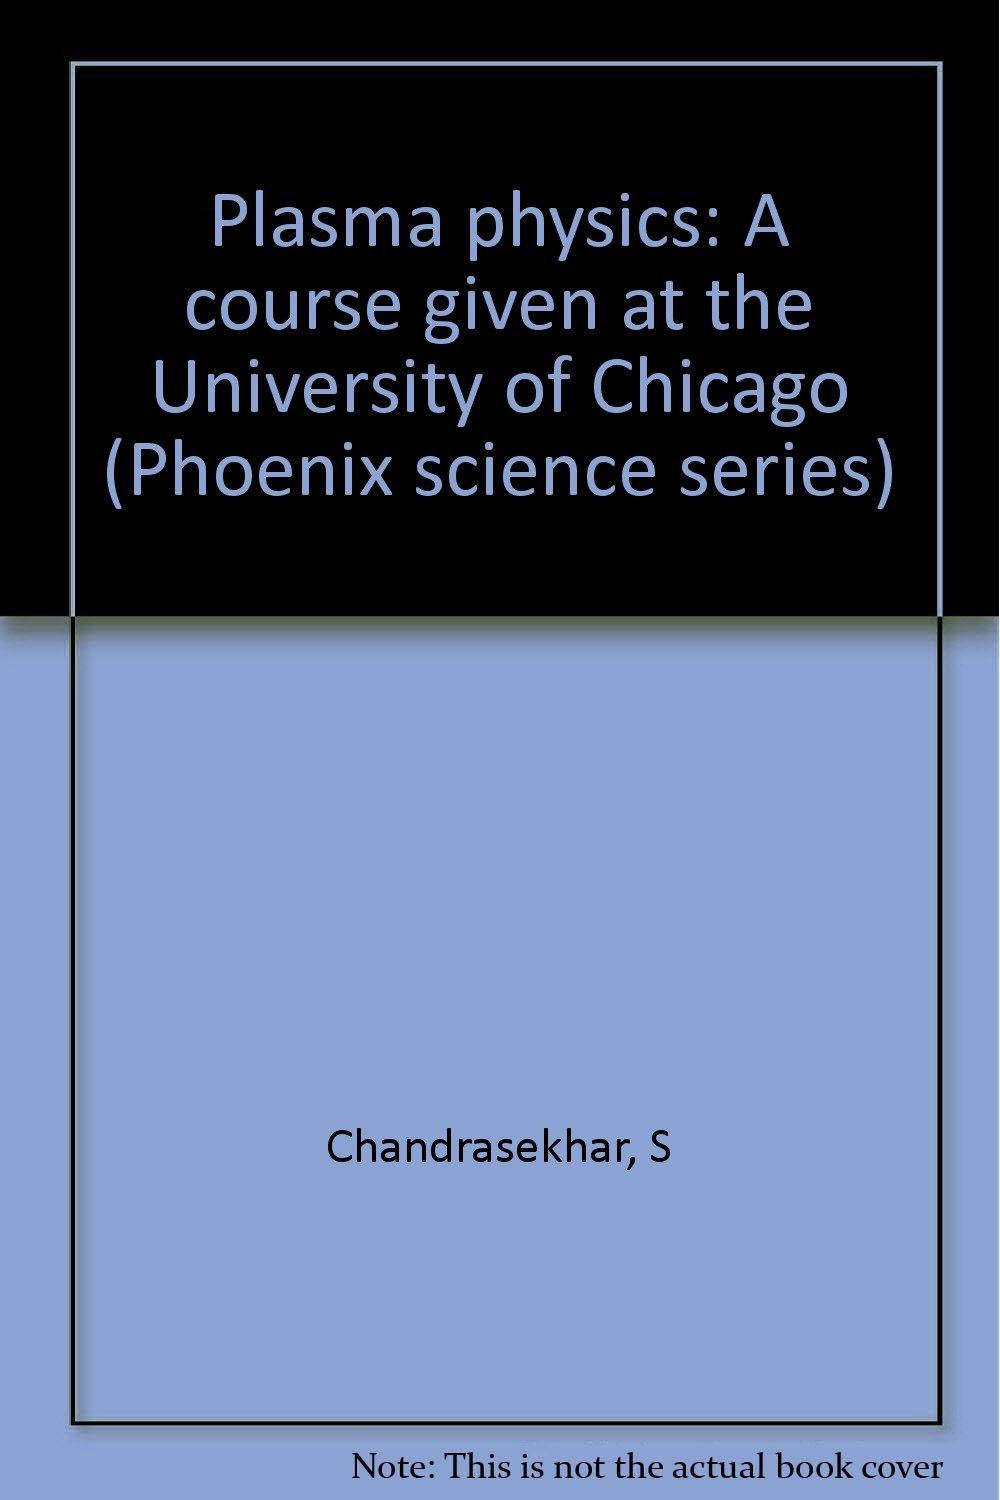 plasma physics a course given at the university of chicago 1st edition s chandrasekhar b0007fvw46